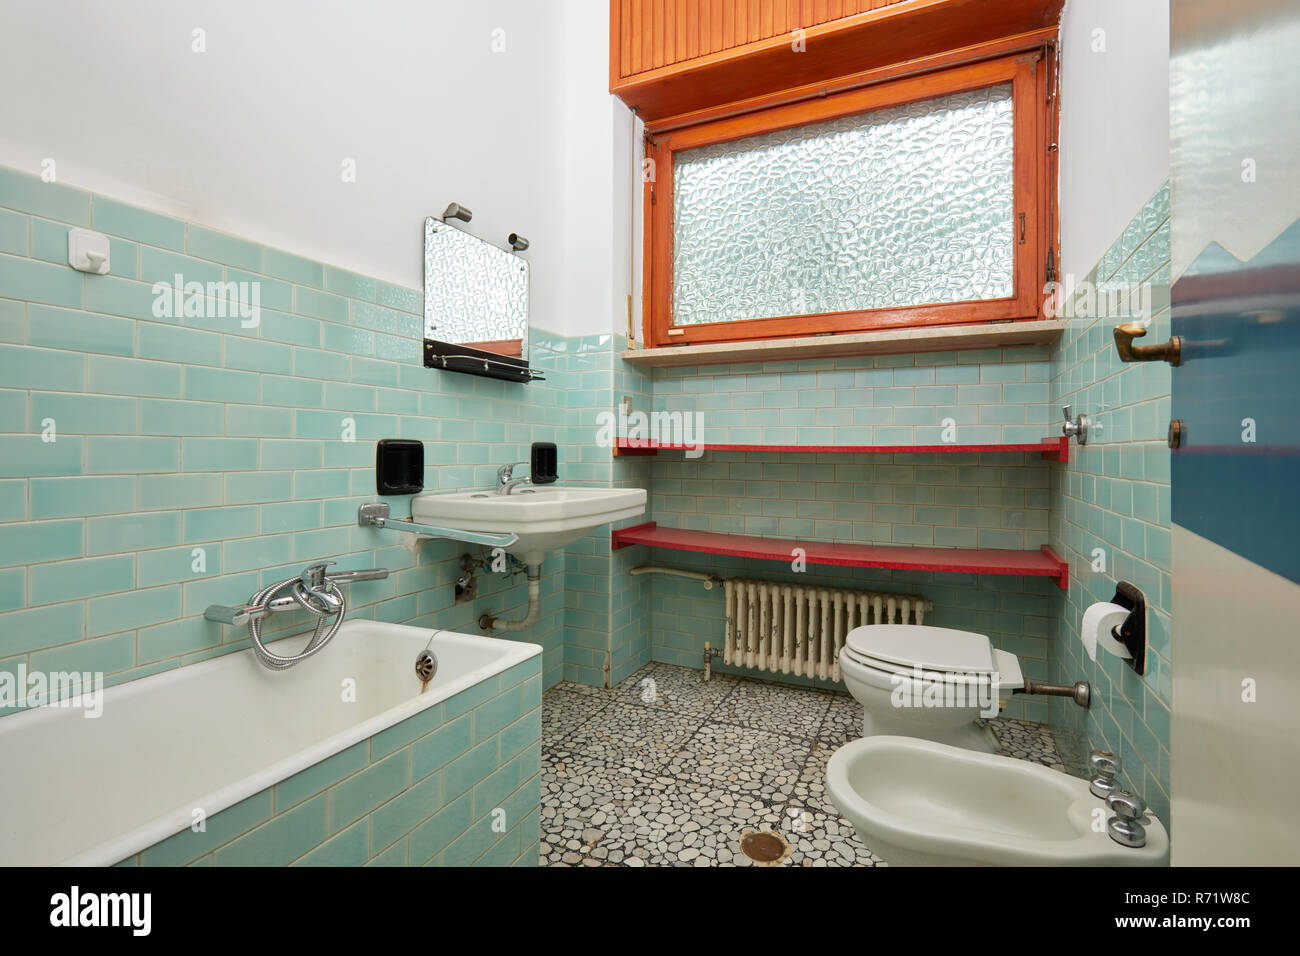 Old bathroom with bathtub and bidet in apartment interior Stock Photo